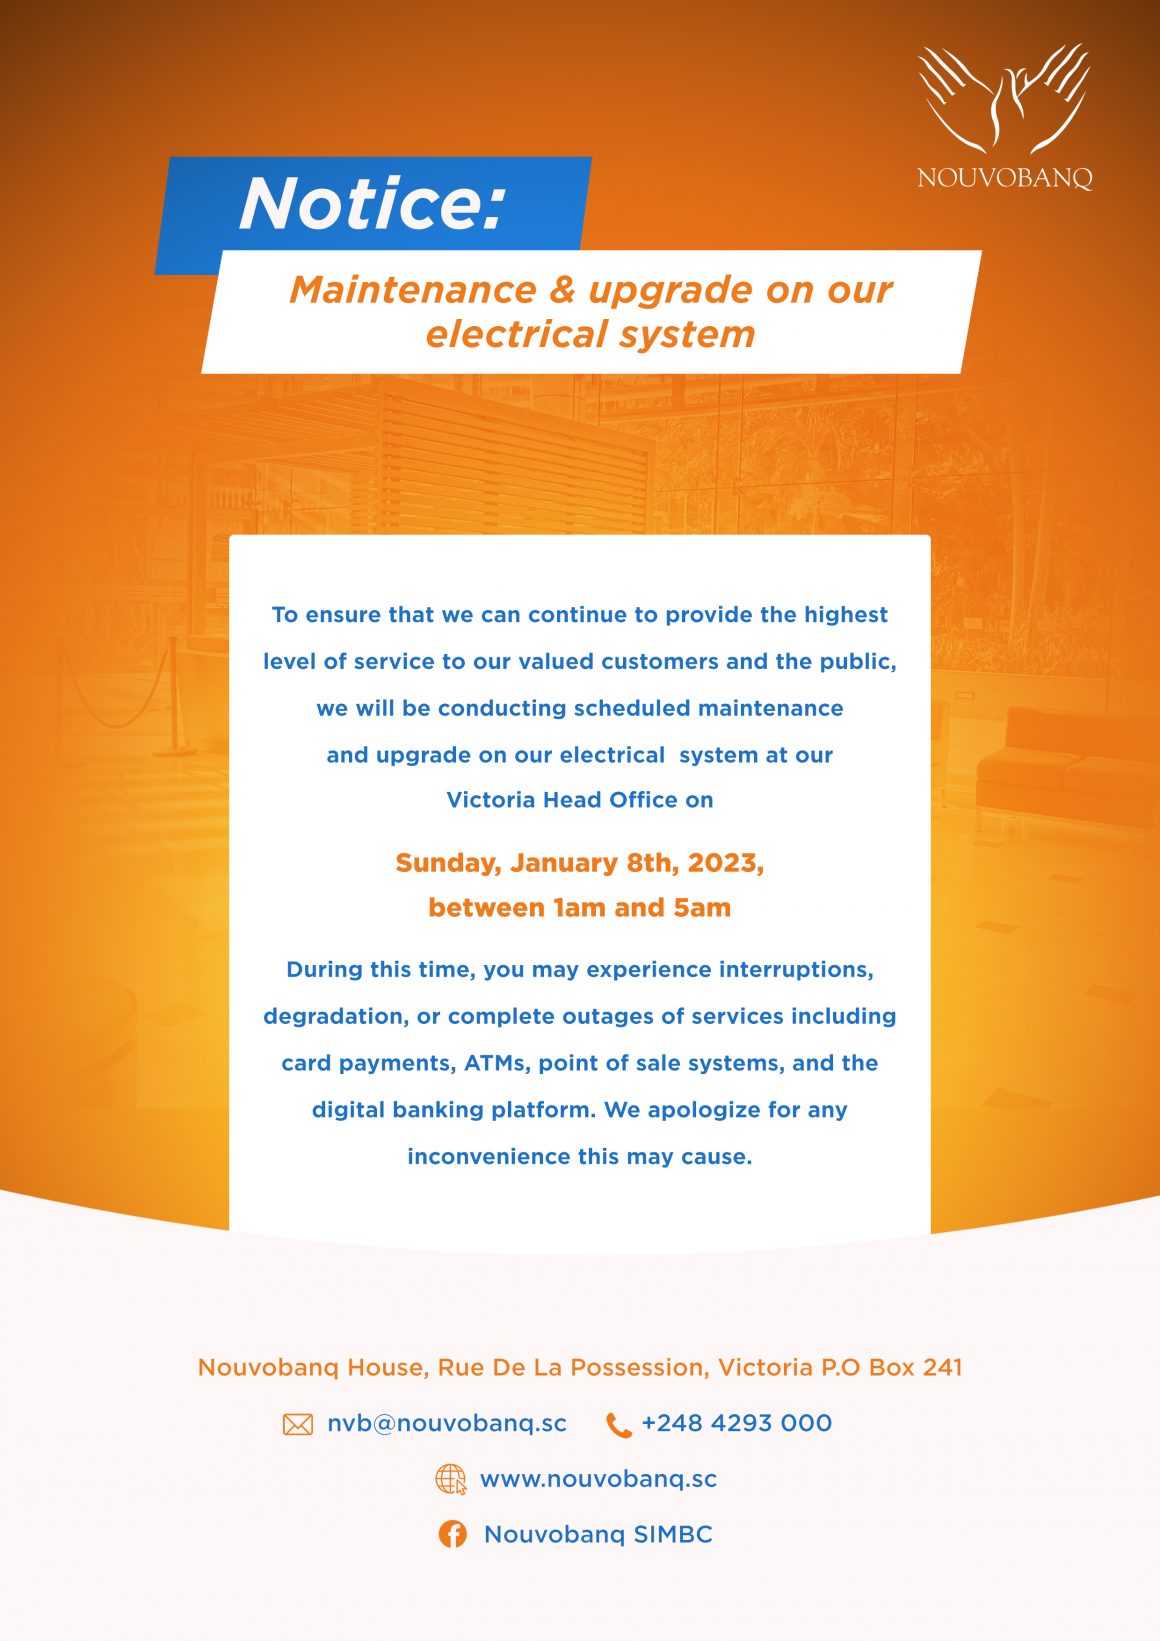 Notice: Maintenance & Upgrade on our electrical system